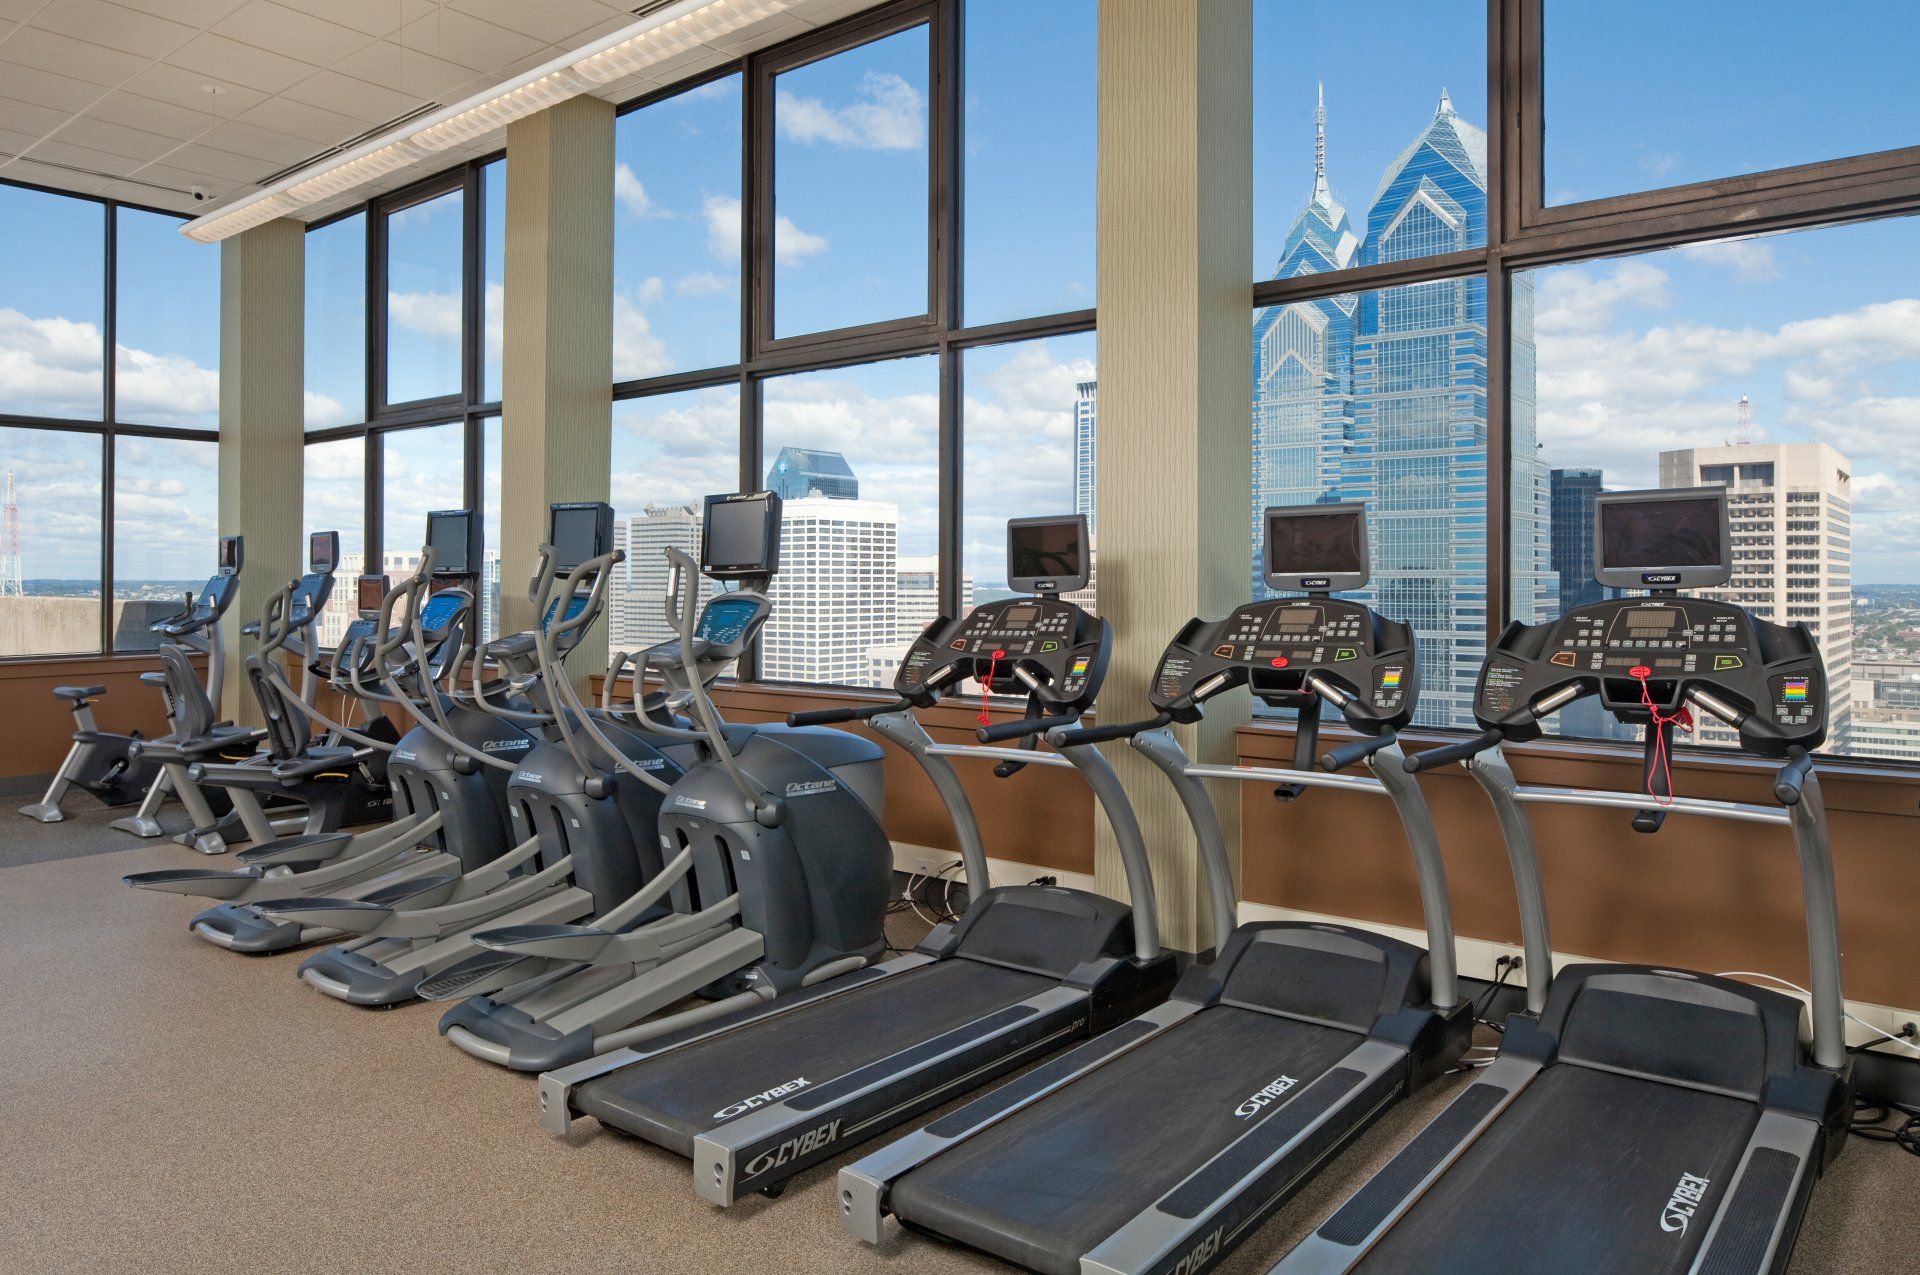 A gym with a lot of treadmills and ellipticals